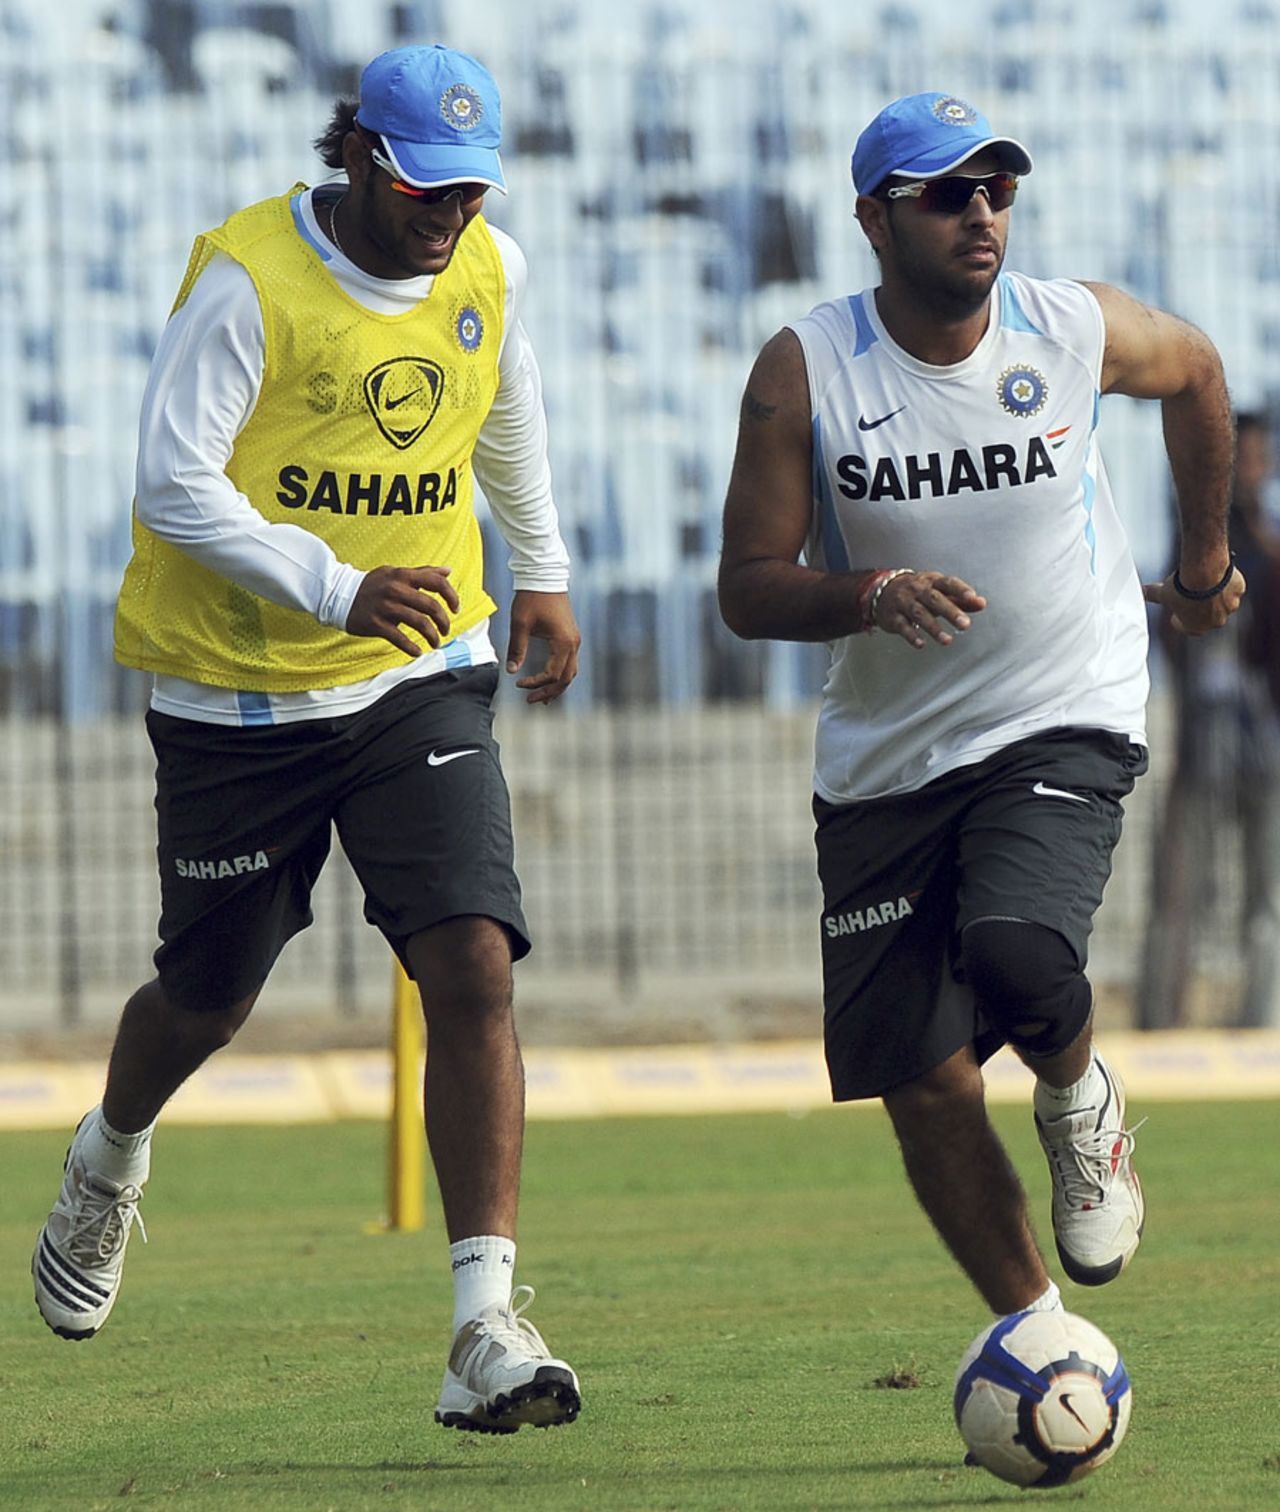 Saurabh Tiwary and Yuvraj Singh play a game of football during practice, Chennai, December 9, 2010